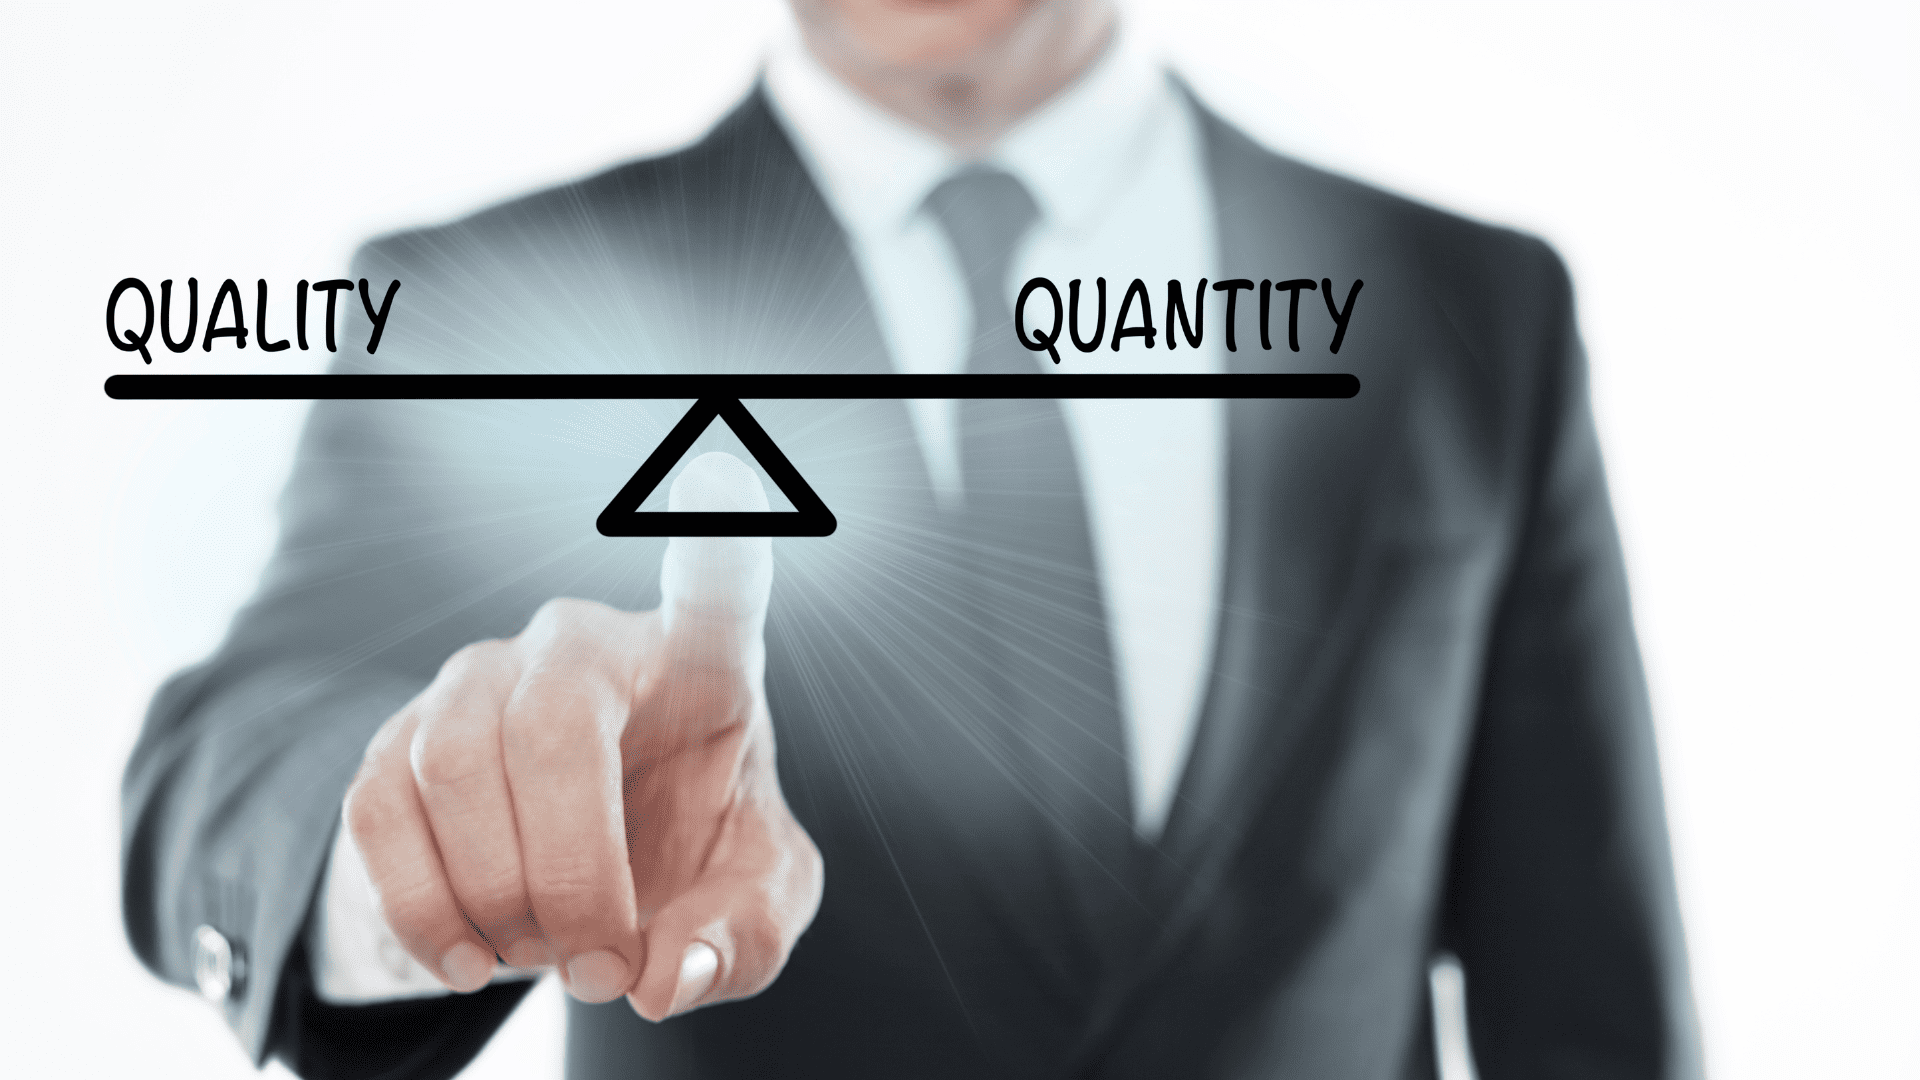 Establishing a quality over quantity mindset in our work